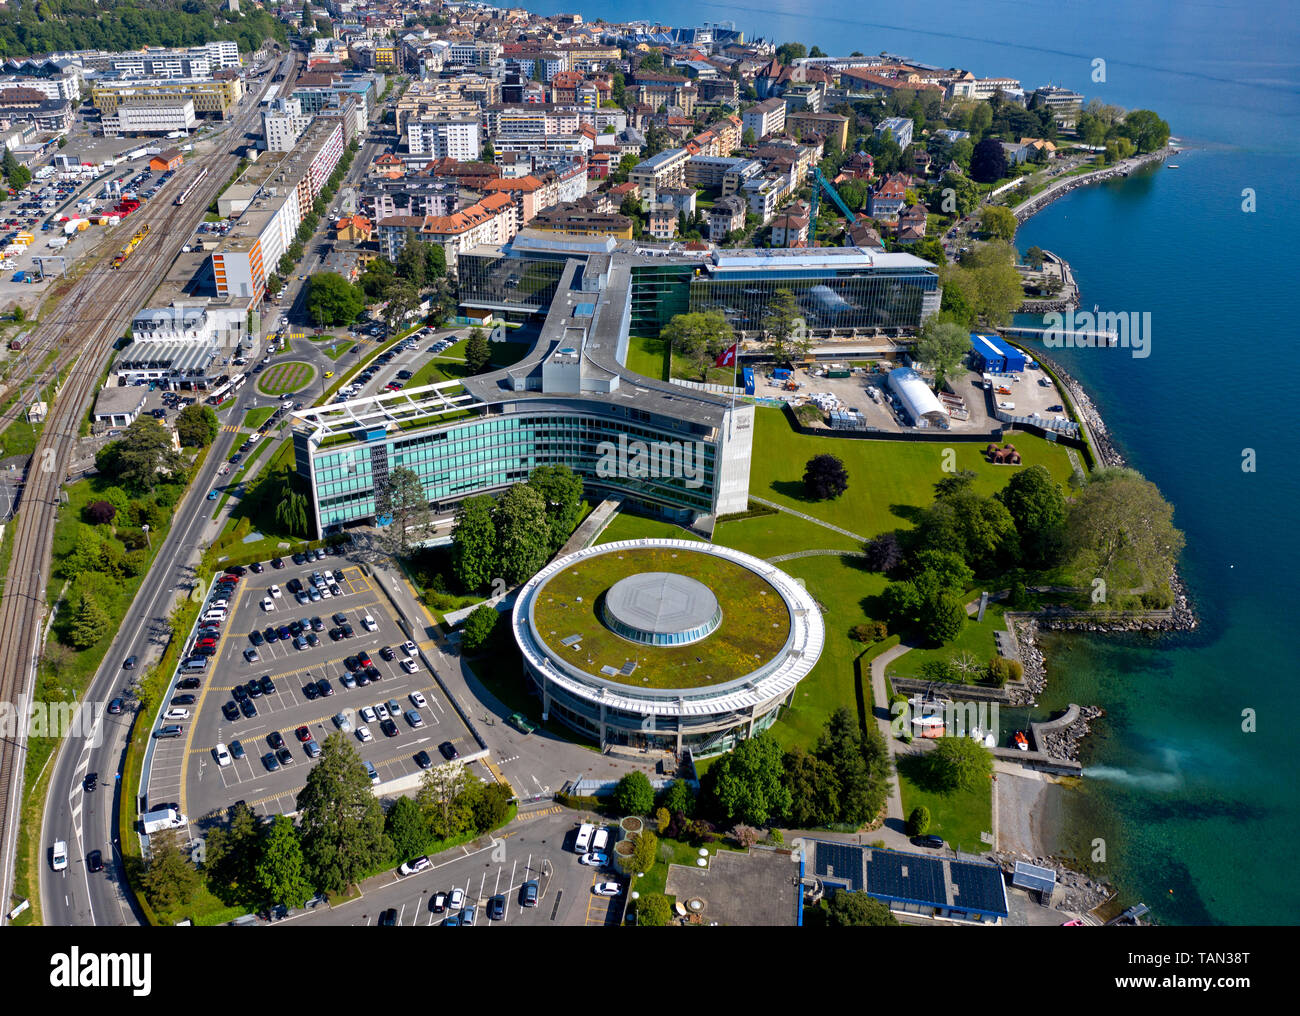 Headquarters of the Swiss multinational food and drink company Nestle S.A. at Lac Leman, Vevey, Switzerland Stock Photo